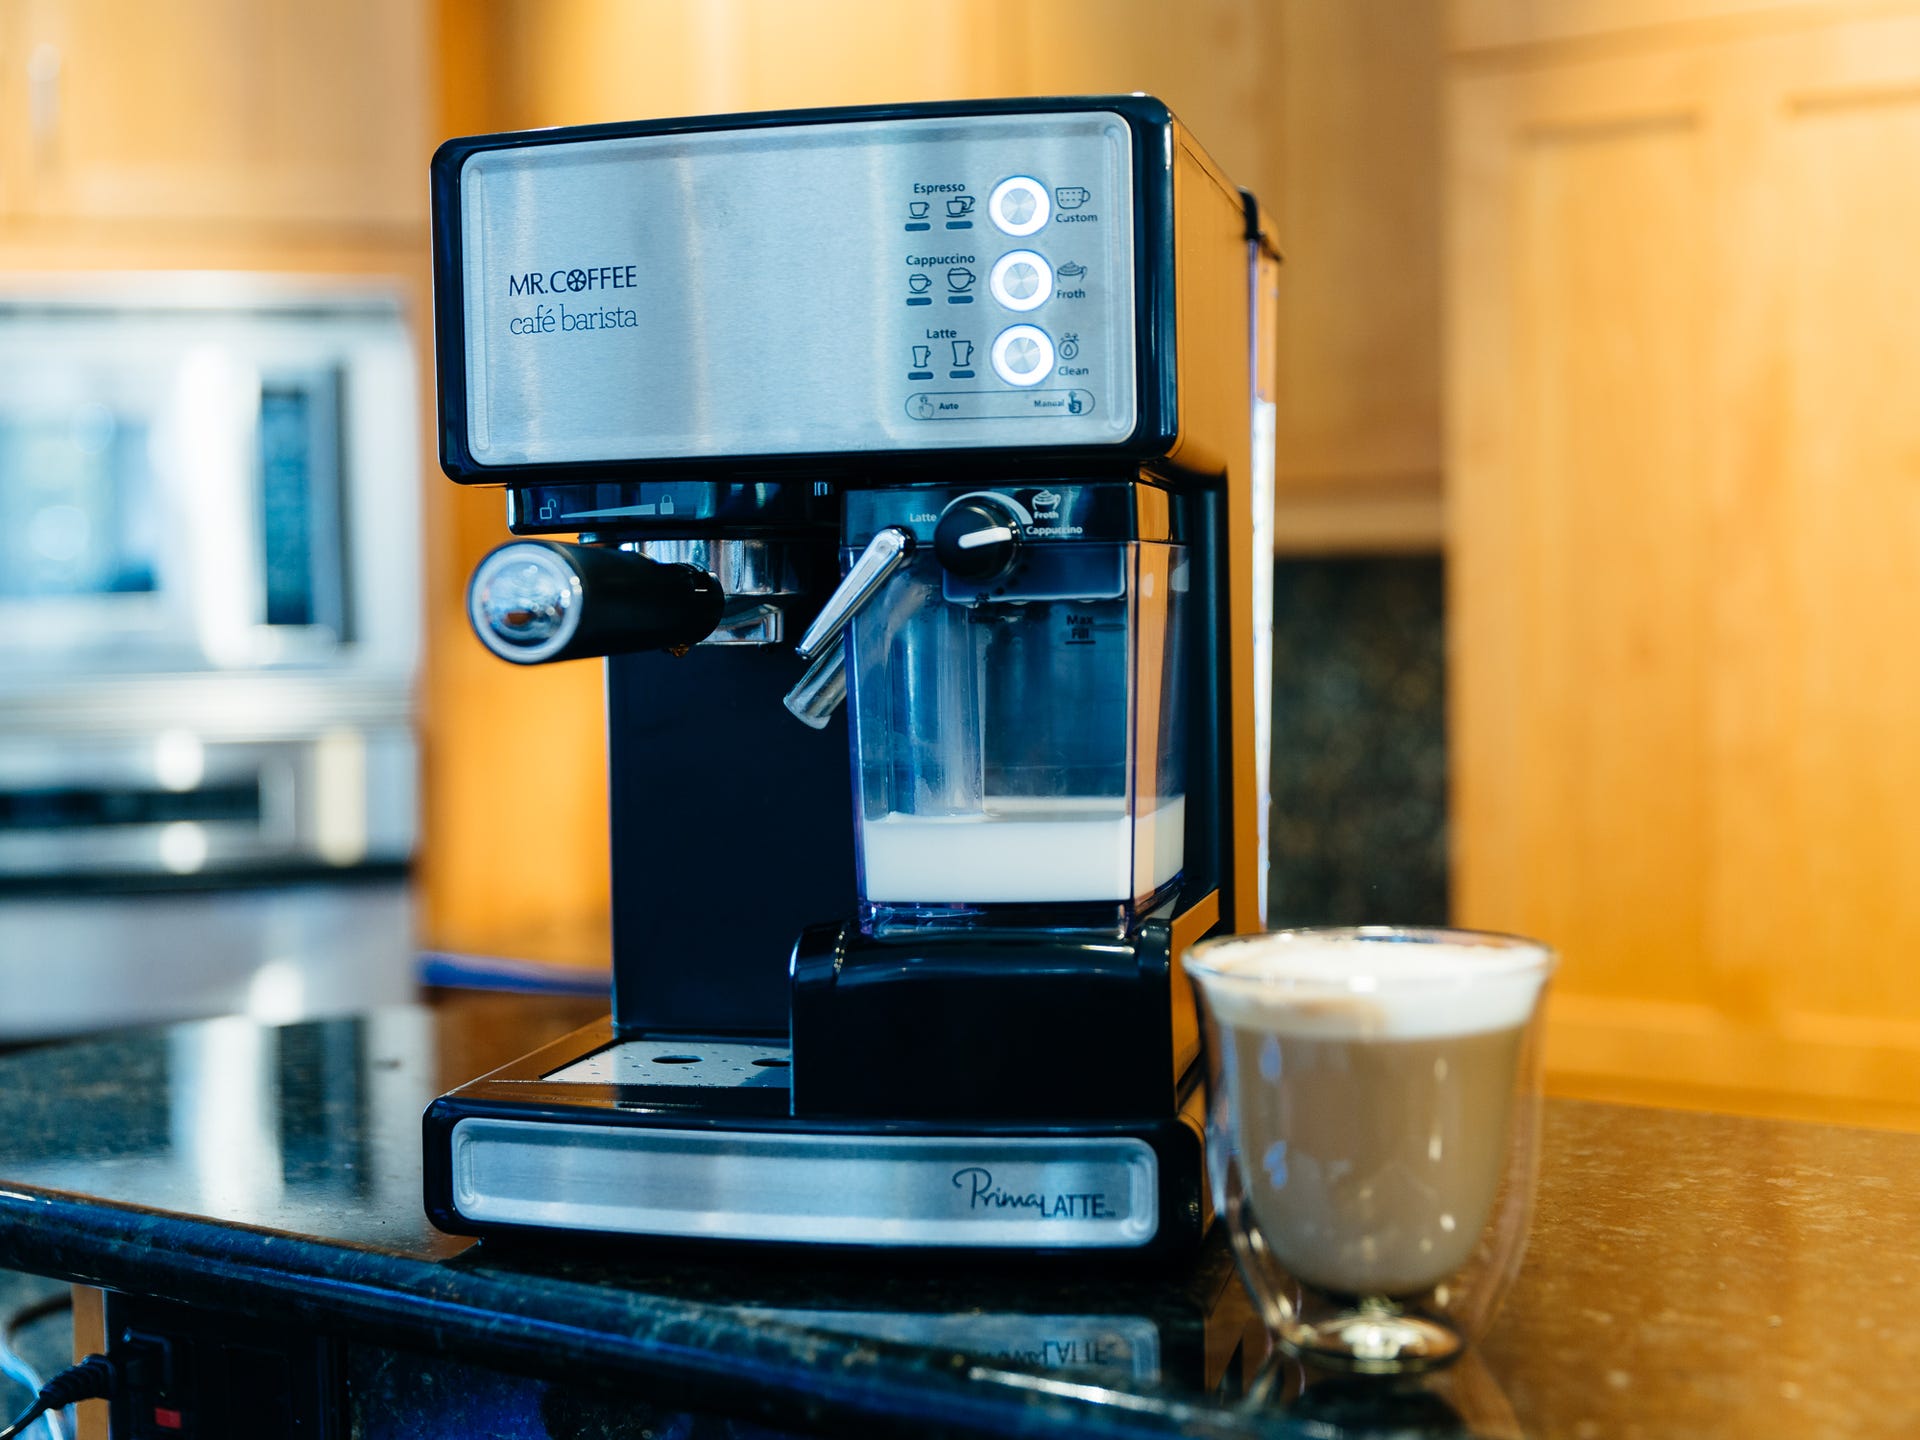 Make espresso at home without spending a fortune - CNET